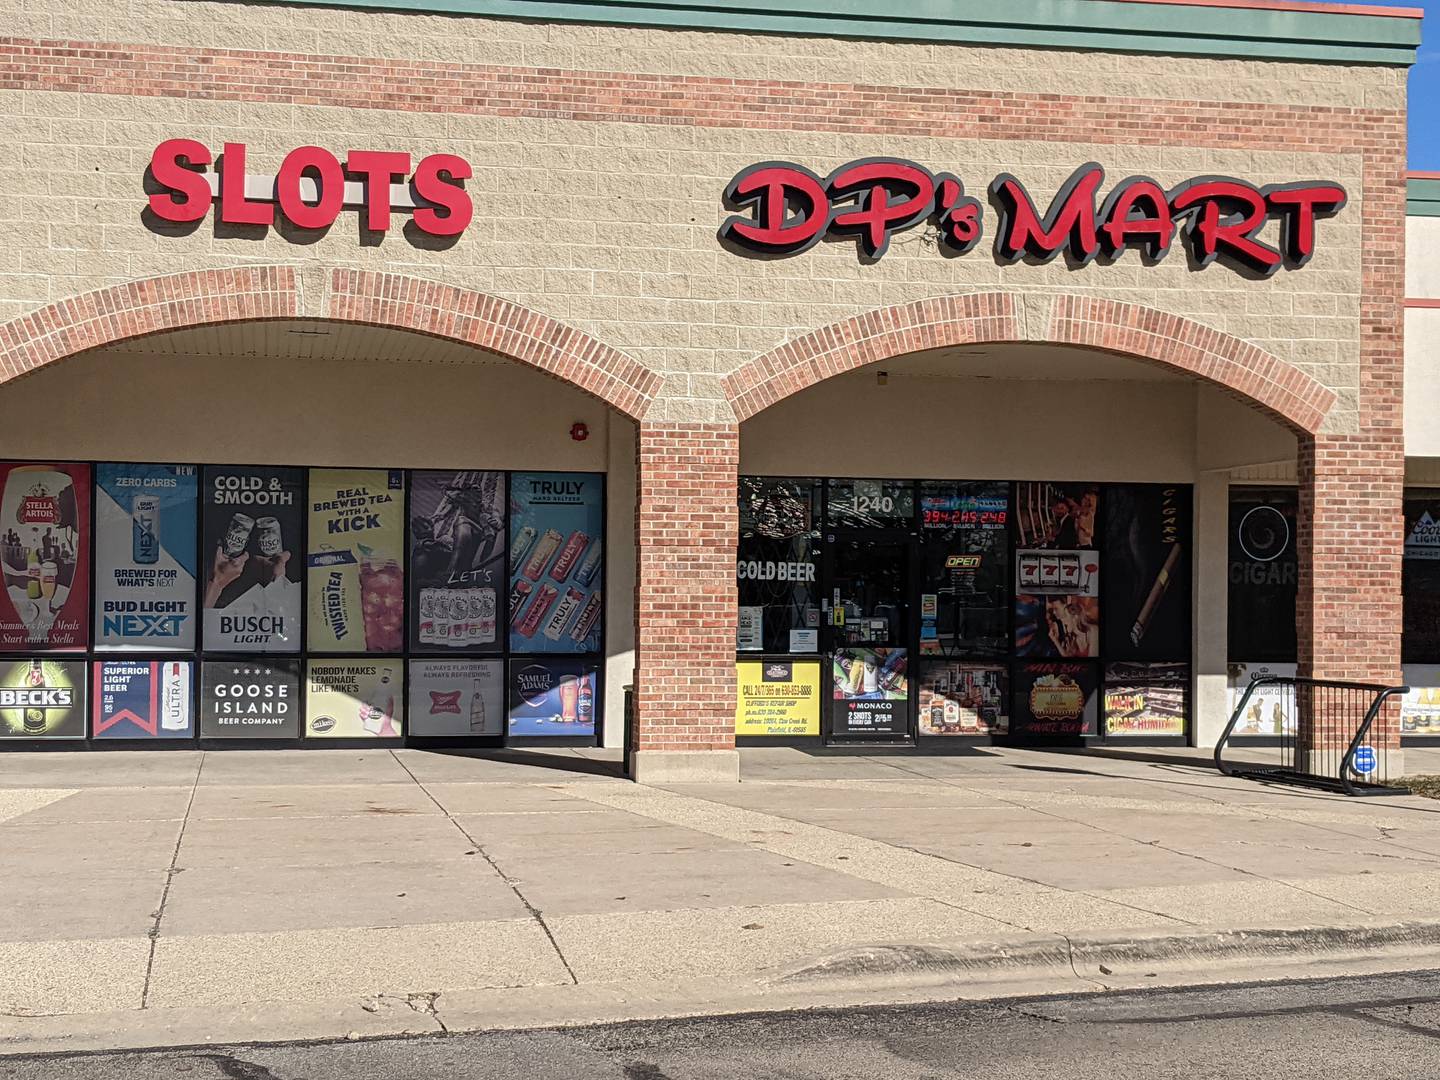 Oswego village trustees voted not to allow any more convenience stores to have video gambling. The one convenience store that does have video gambling – DP’s Mart on Douglas Road – will be allowed to continue to offer it.